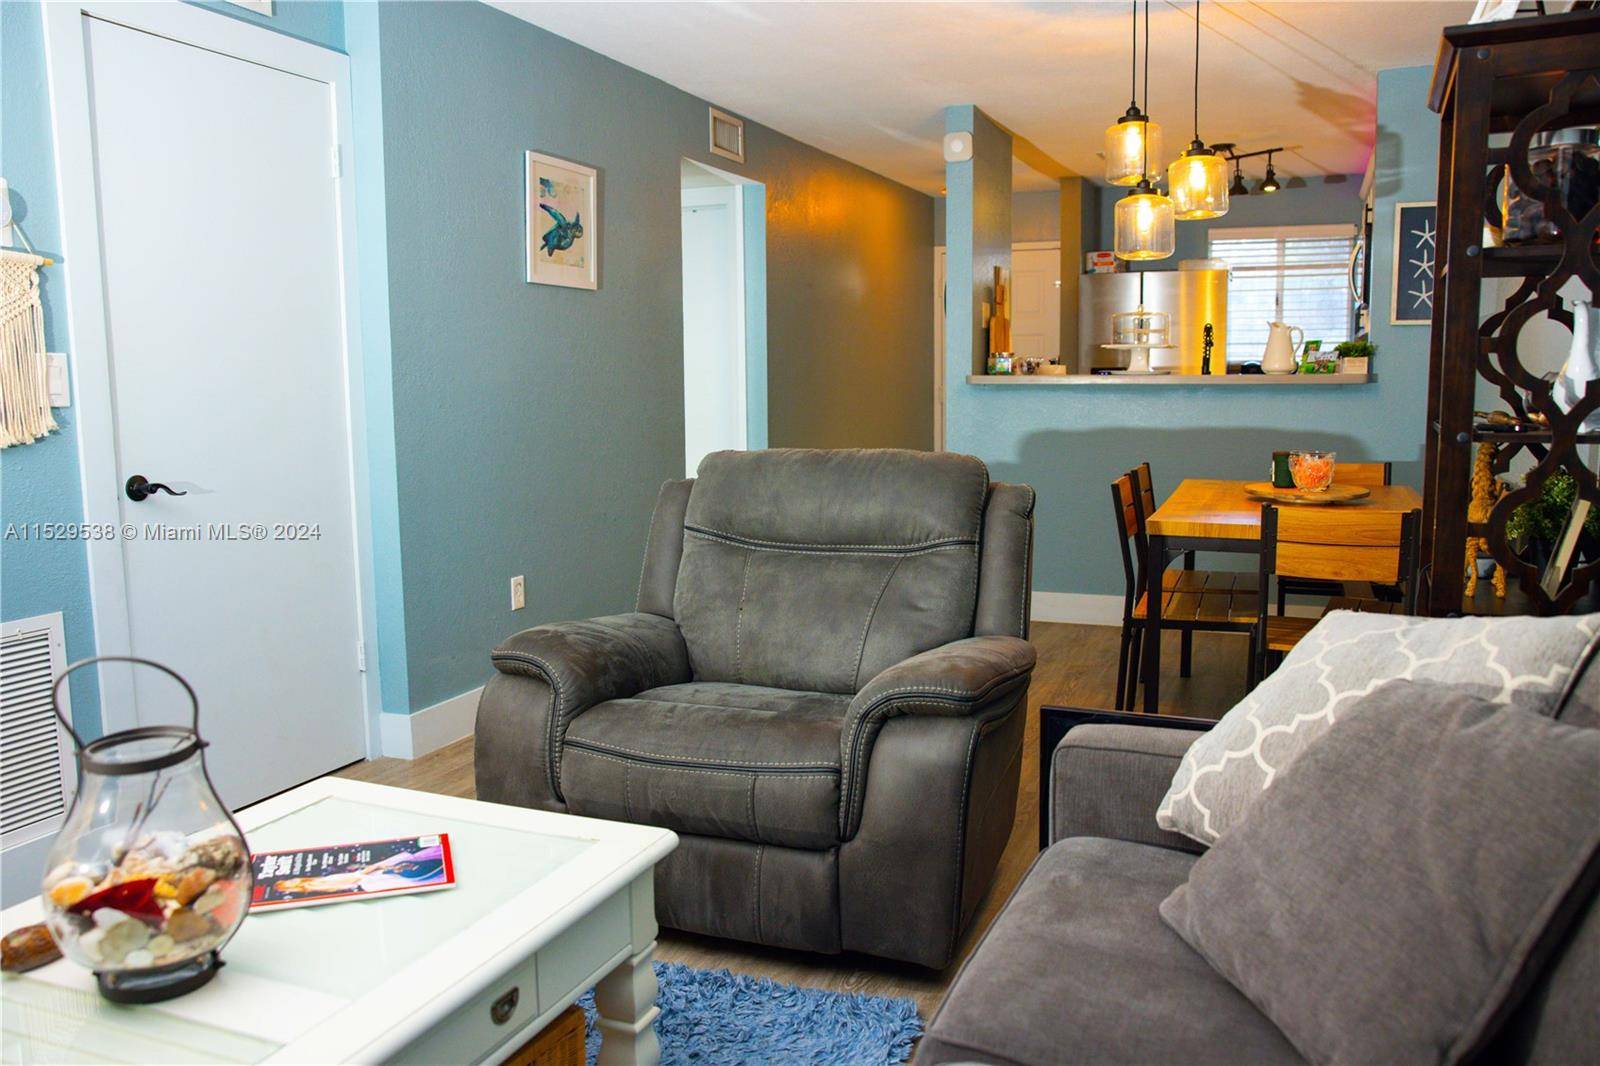 Ground floor unit in the first building with tile floors throughout this two bedroom and two bath condo.